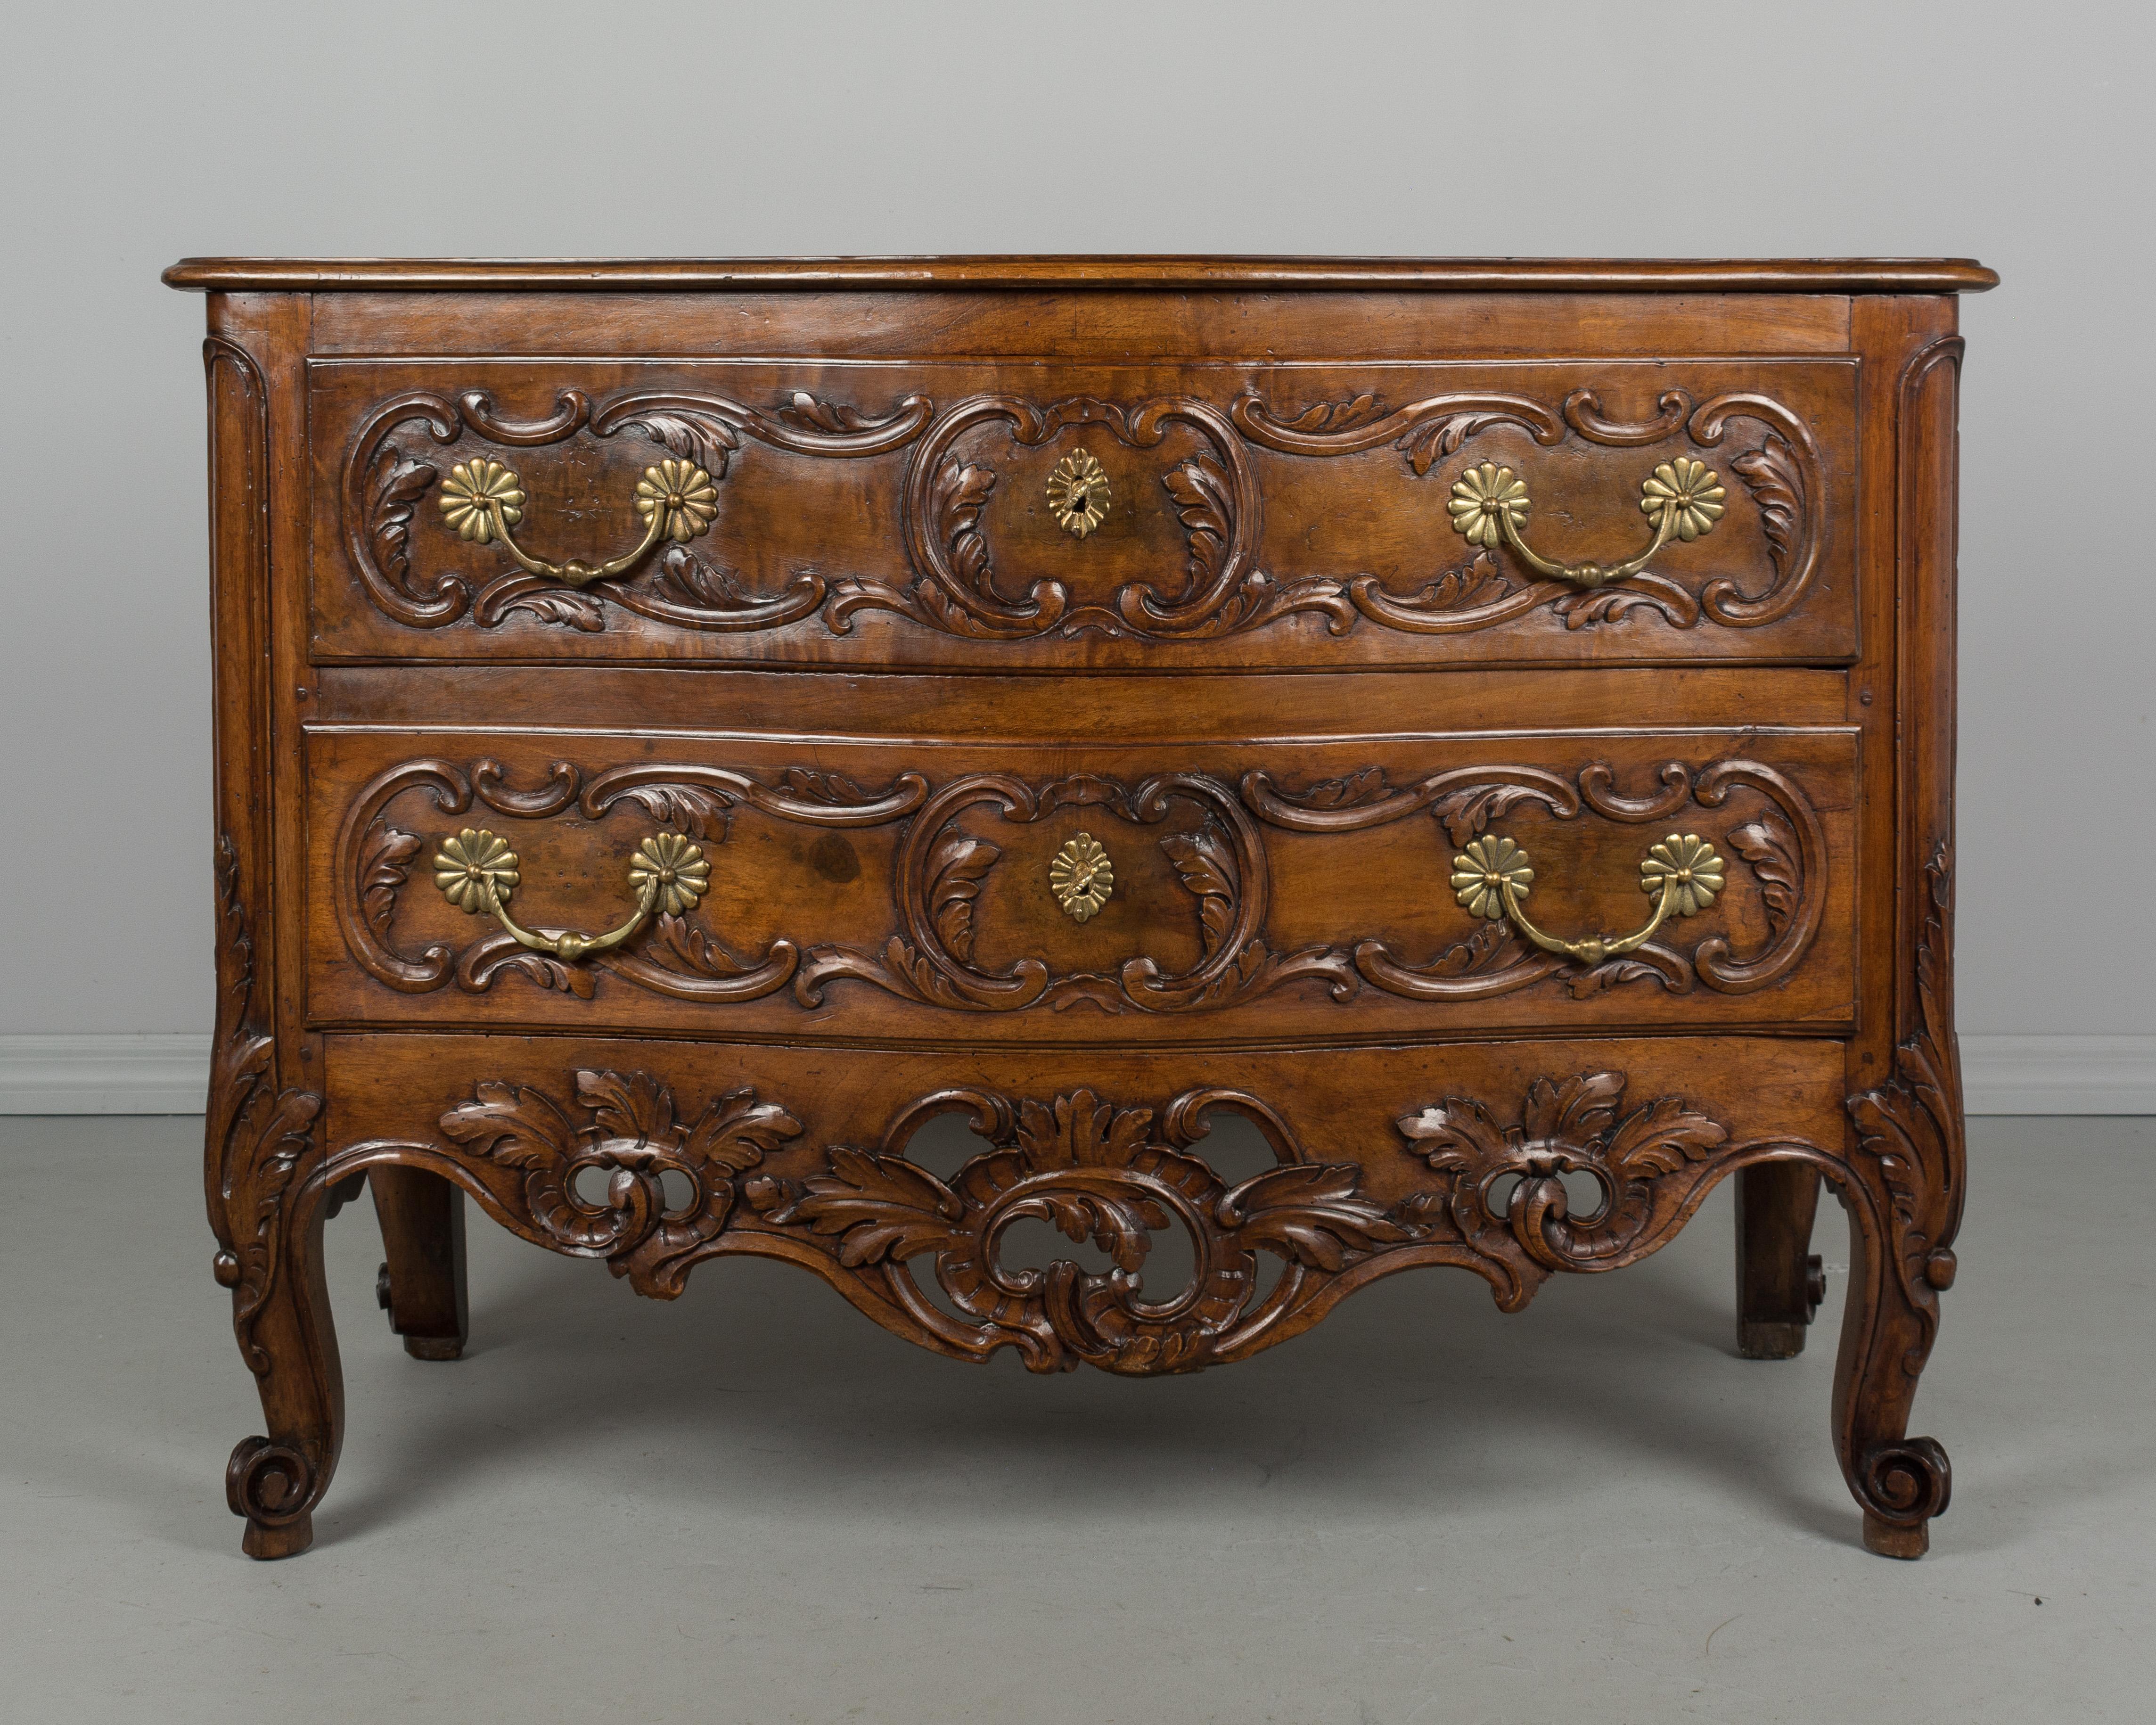 18th Century Louis XV Period Commode or Chest of Drawers (Louis XV.)